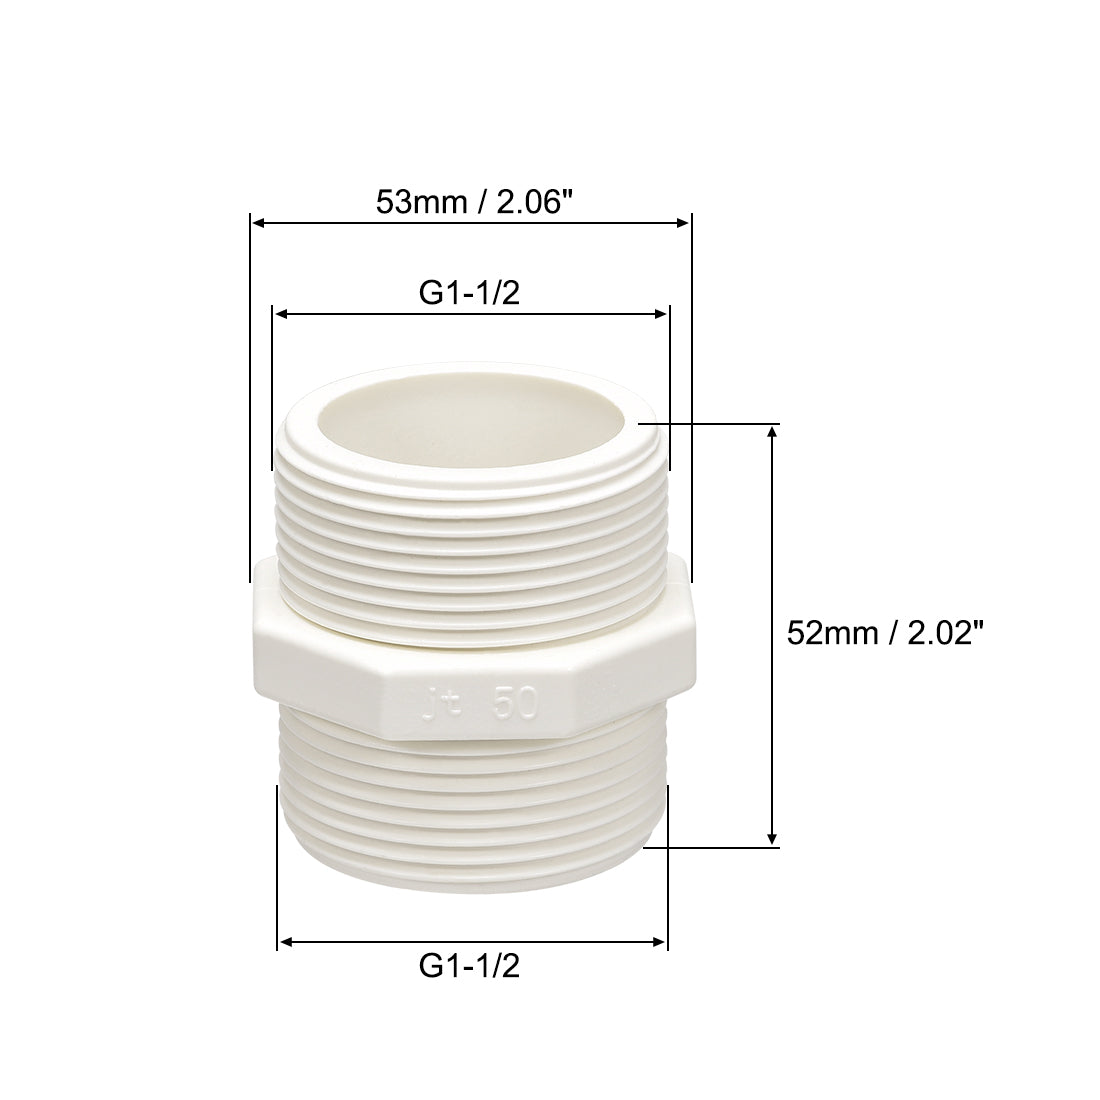 uxcell Uxcell PVC Pipe Fitting Hex Nipple G1-1/2 x G1-1/2 Male Thread Adapter Connector 2pcs